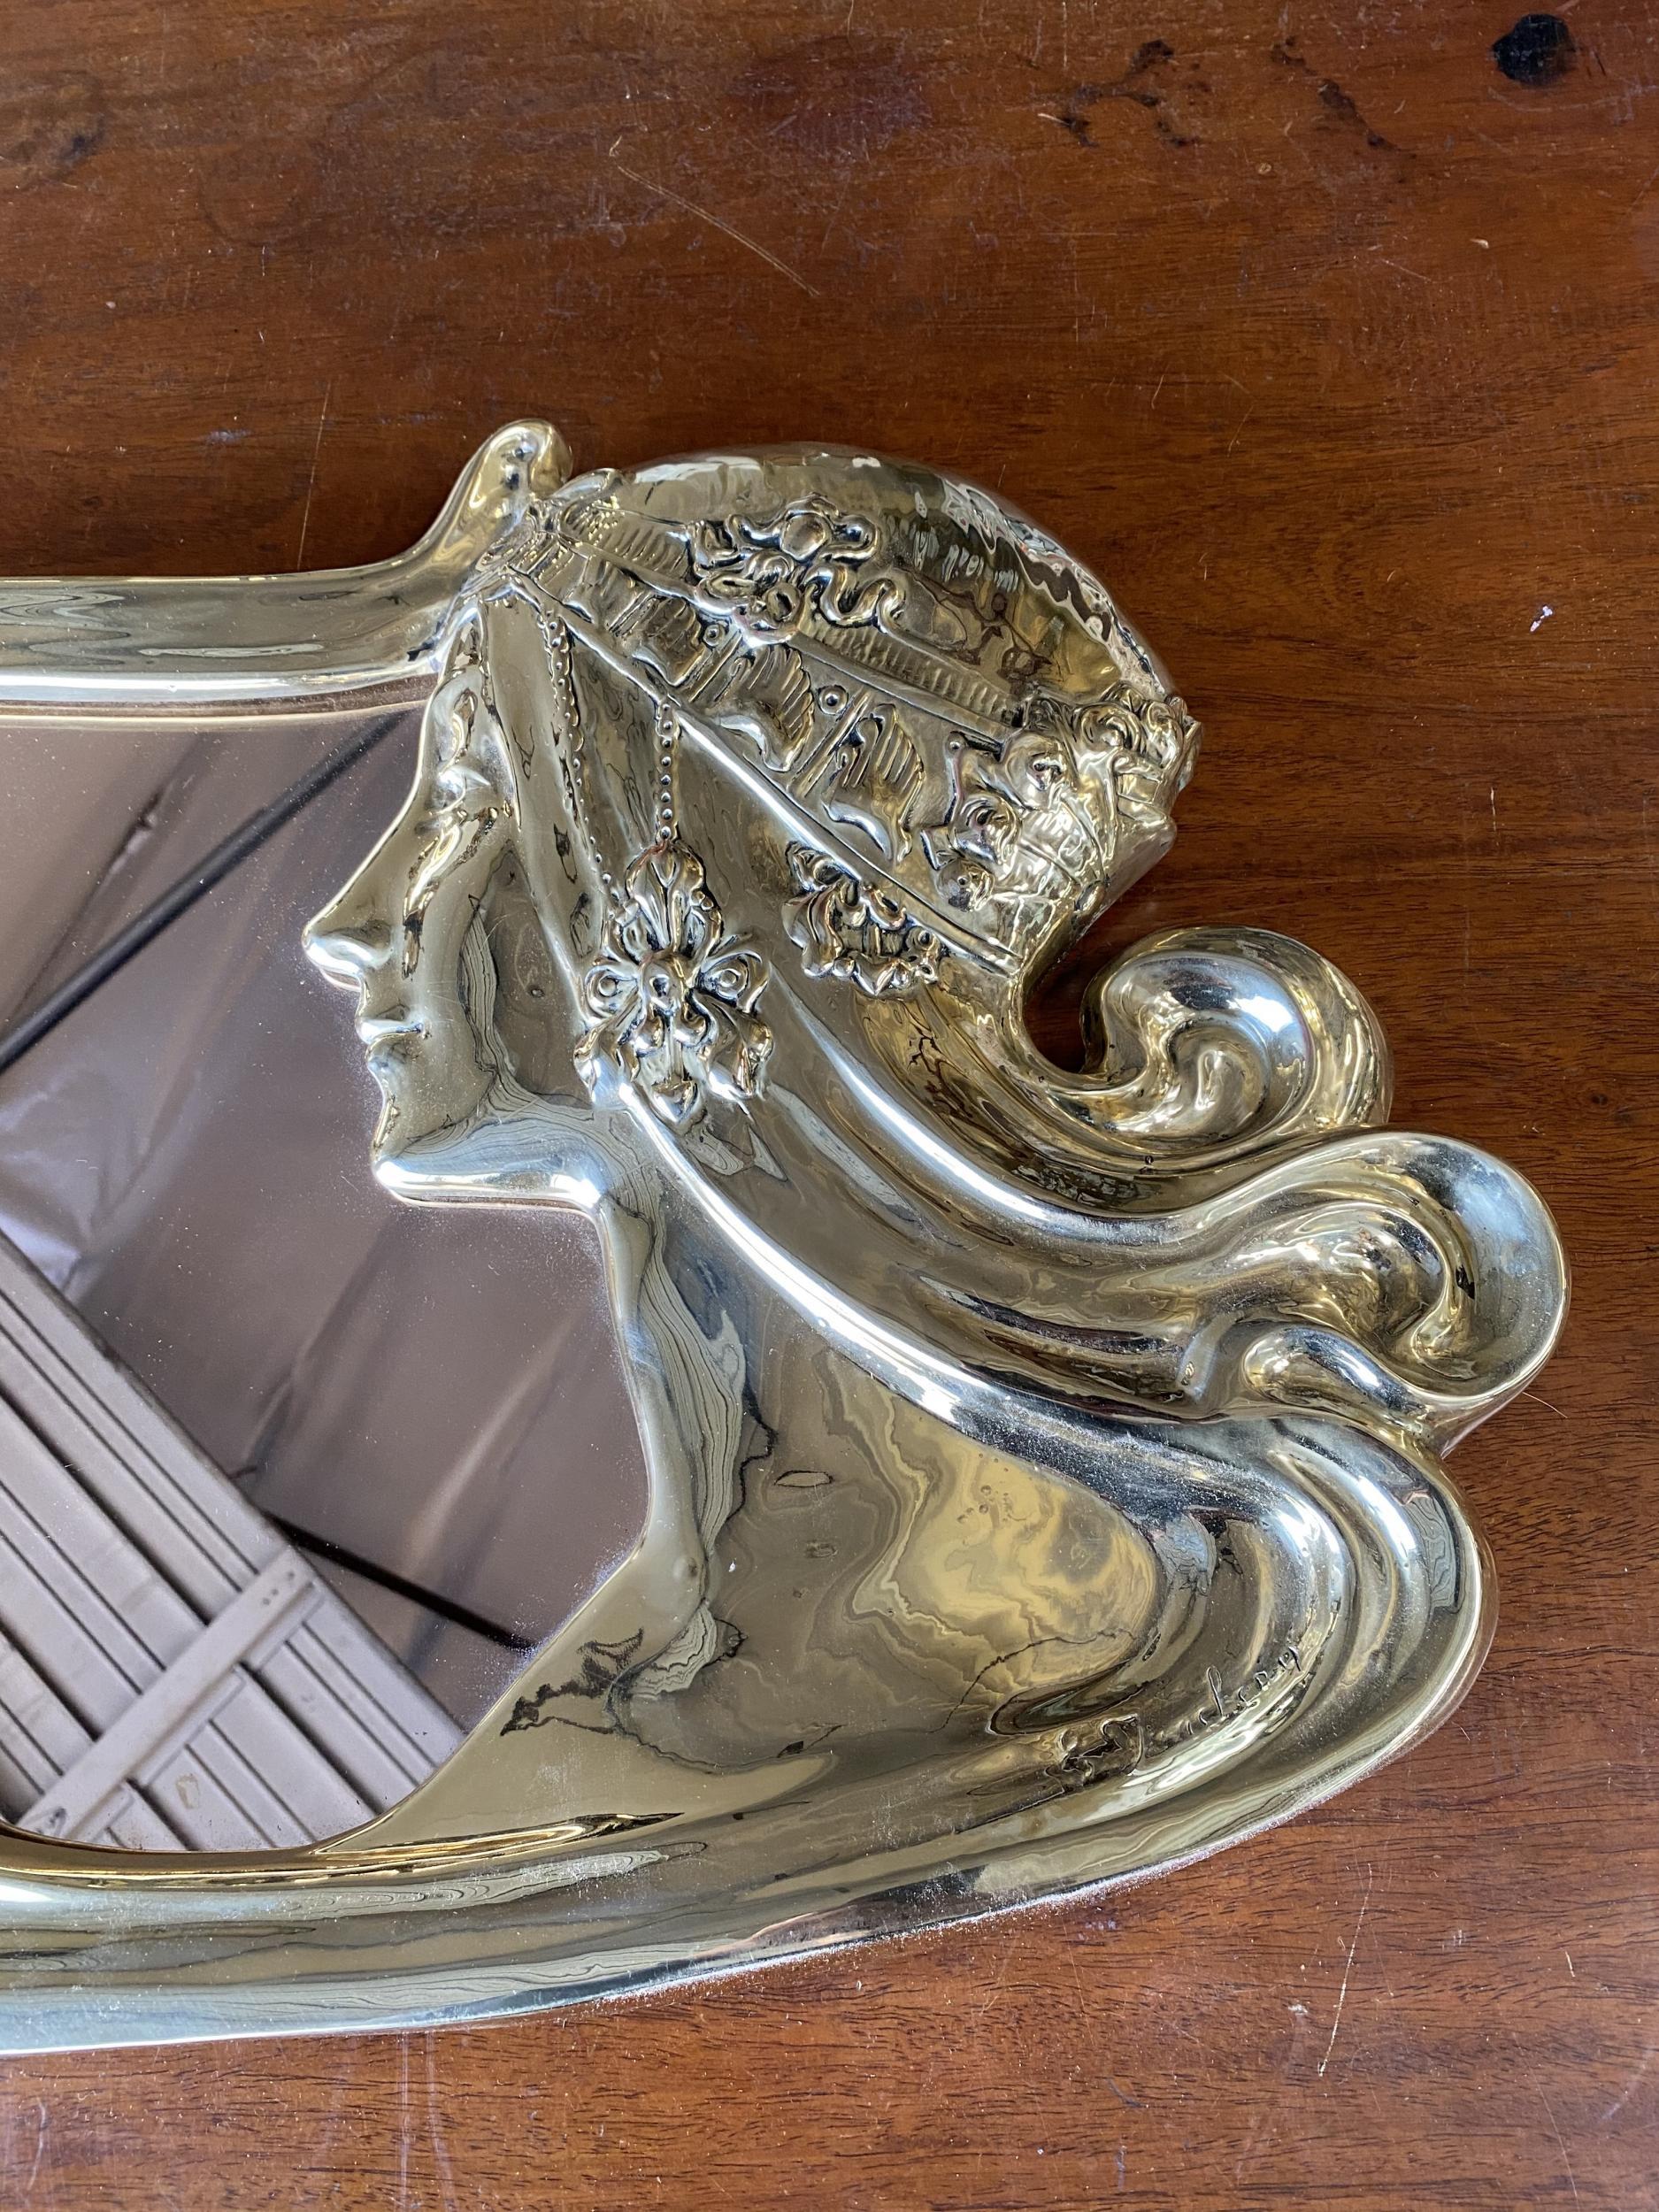 Art Nouveau figural female wall mirror signed Charles Emile Jonchery, circa 1900

The mirror was replated in Bronze.